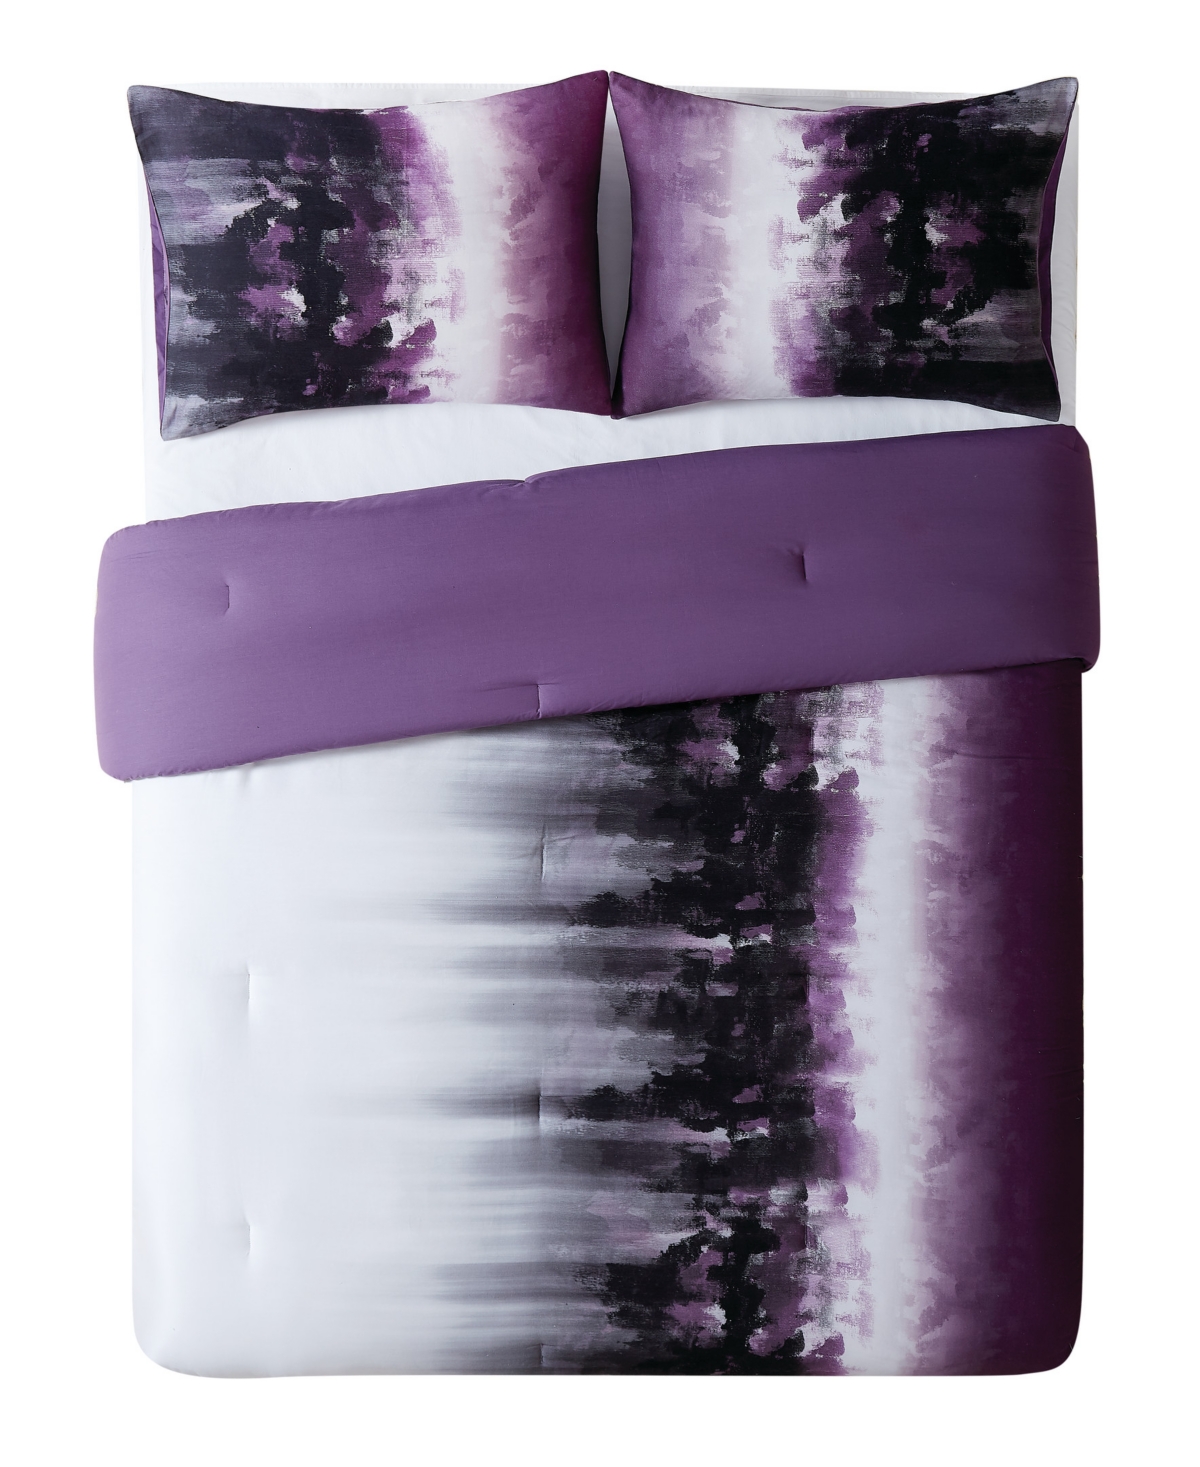 Shop Vince Camuto Home Vince Camuto Mirrea Full/queen Comforter Set In White,purple